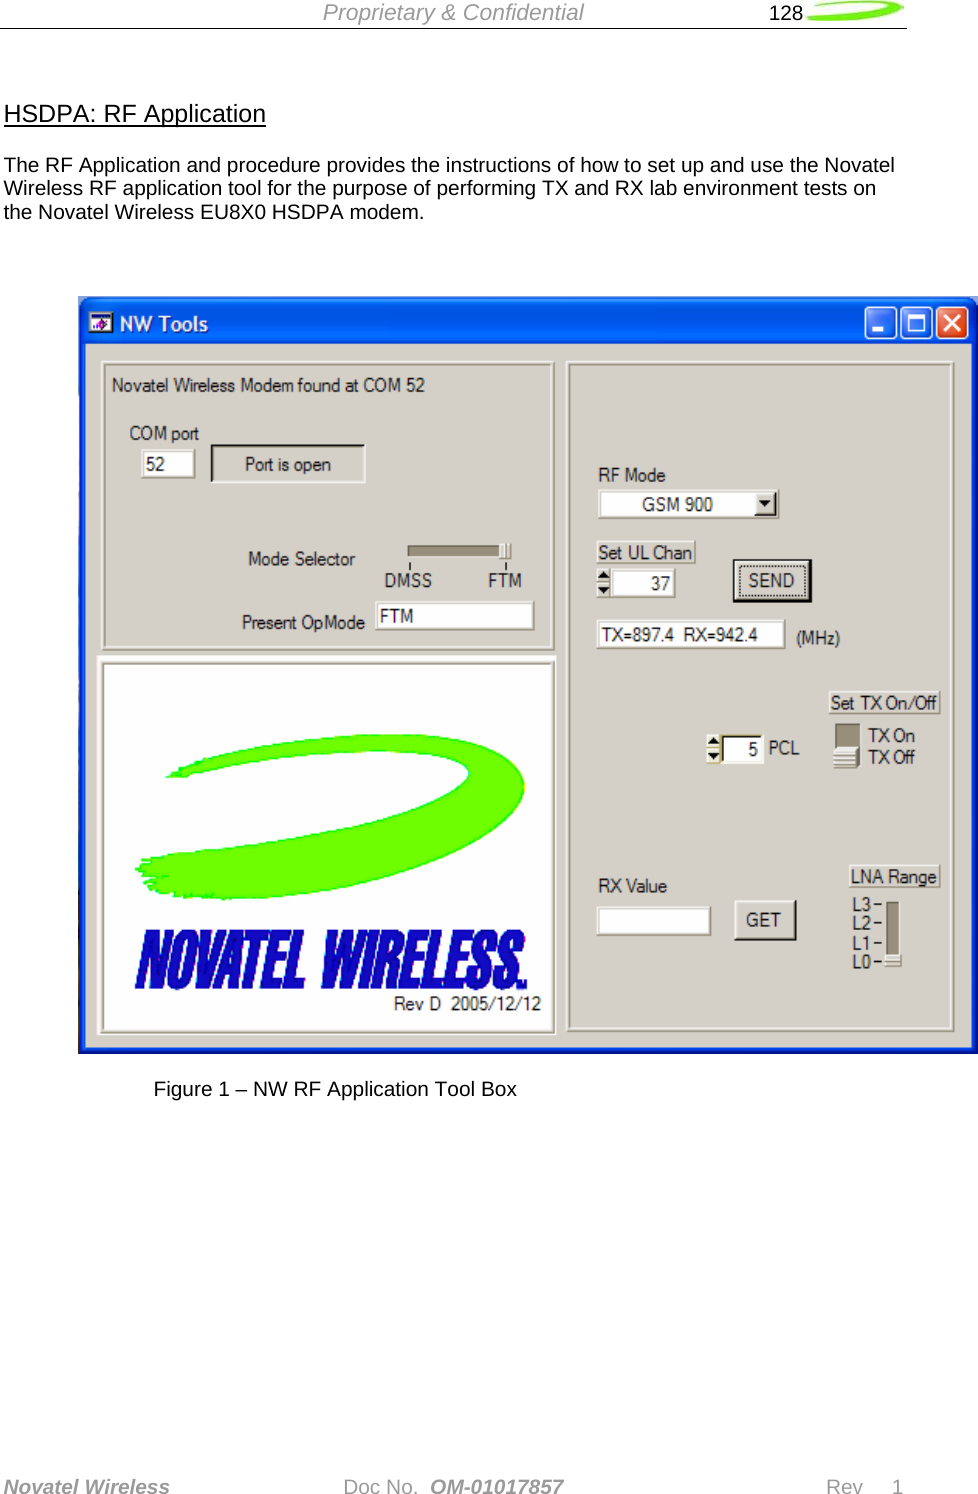  Proprietary &amp; Confidential   128   Novatel Wireless   Doc No.  OM-01017857                              Rev     1  HSDPA: RF Application   The RF Application and procedure provides the instructions of how to set up and use the Novatel Wireless RF application tool for the purpose of performing TX and RX lab environment tests on the Novatel Wireless EU8X0 HSDPA modem.            Figure 1 – NW RF Application Tool Box    